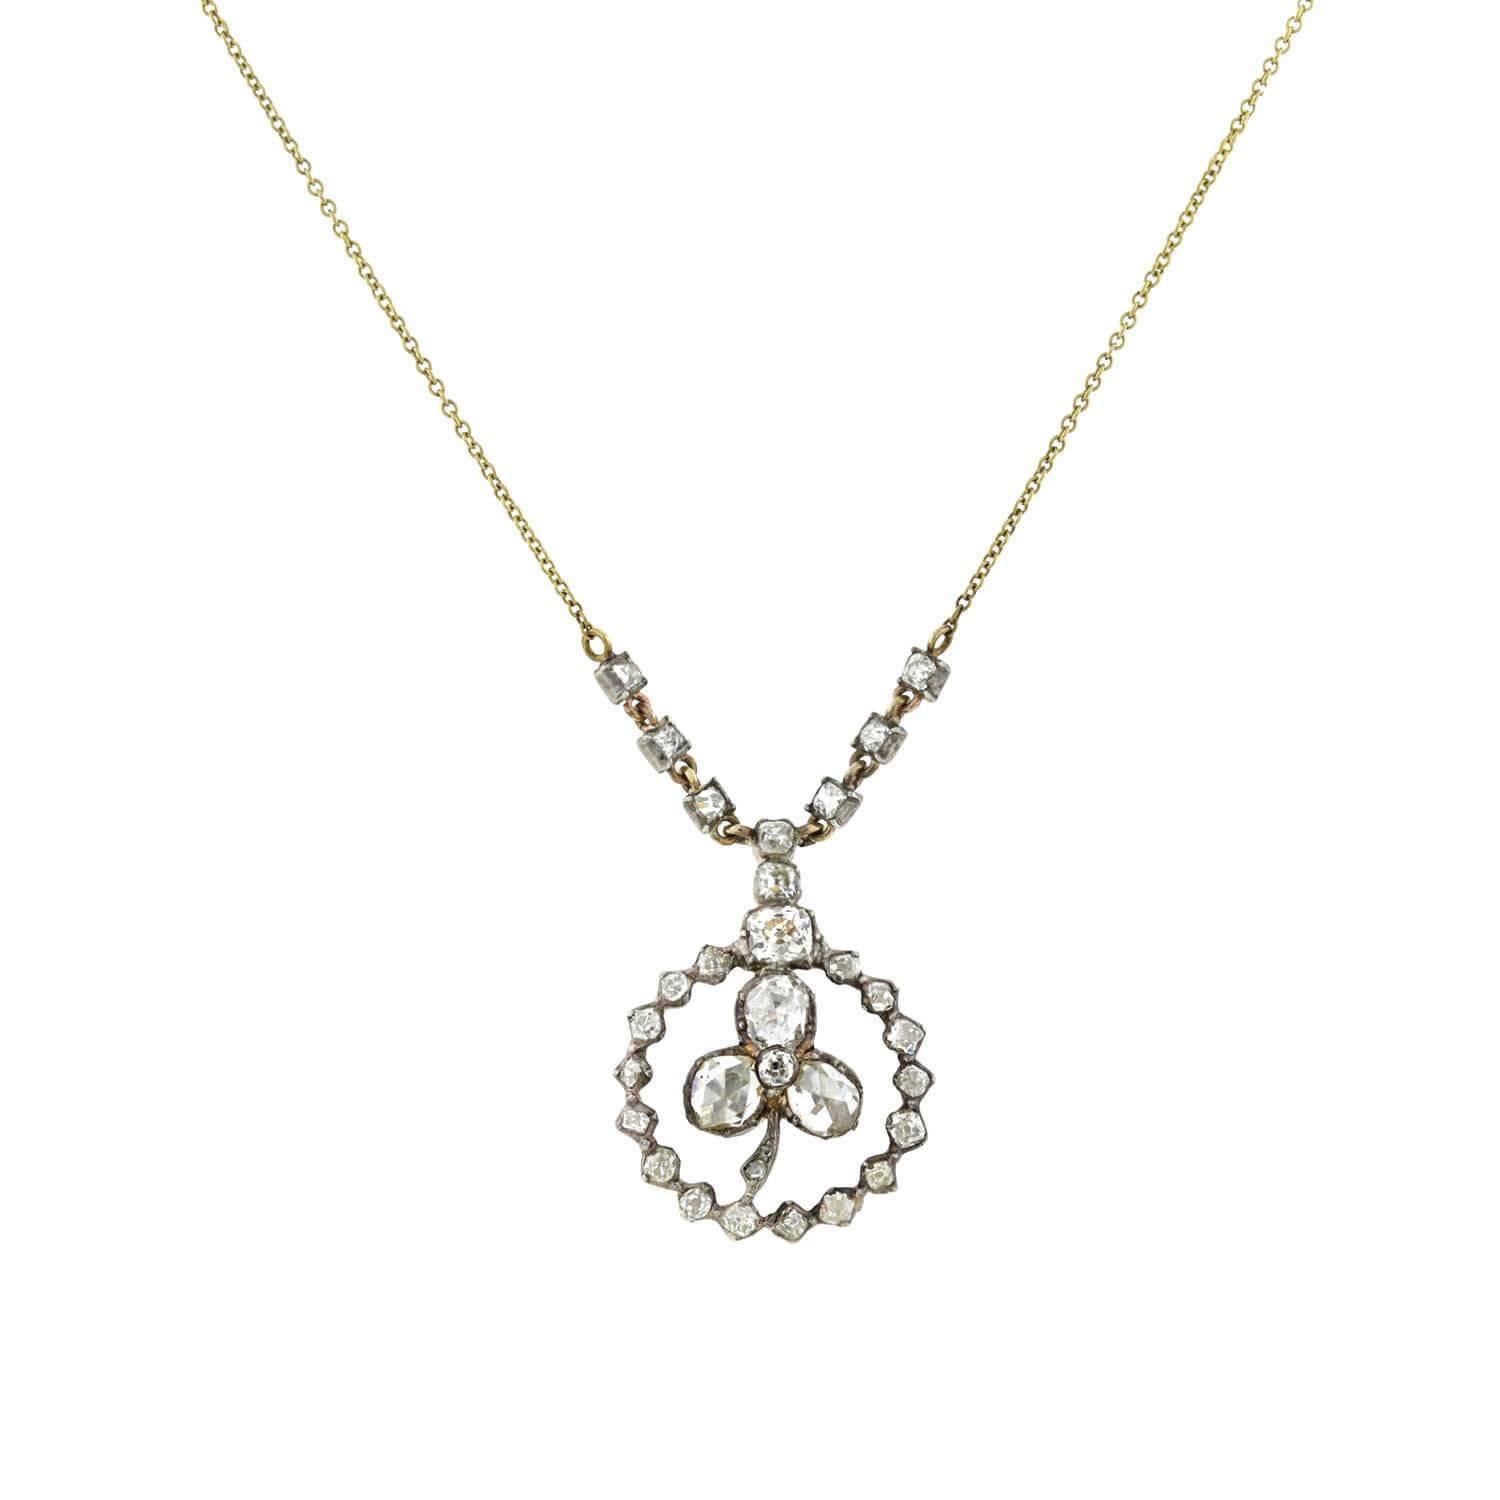 A breathtaking diamond pendant necklace from the Georgian (ca1750) era! Crafted in 15kt rose gold topped with sterling silver, this lovely foil-backed diamond trefoil graces the center of the pendant, encircled by a sparkling diamond border. A trio